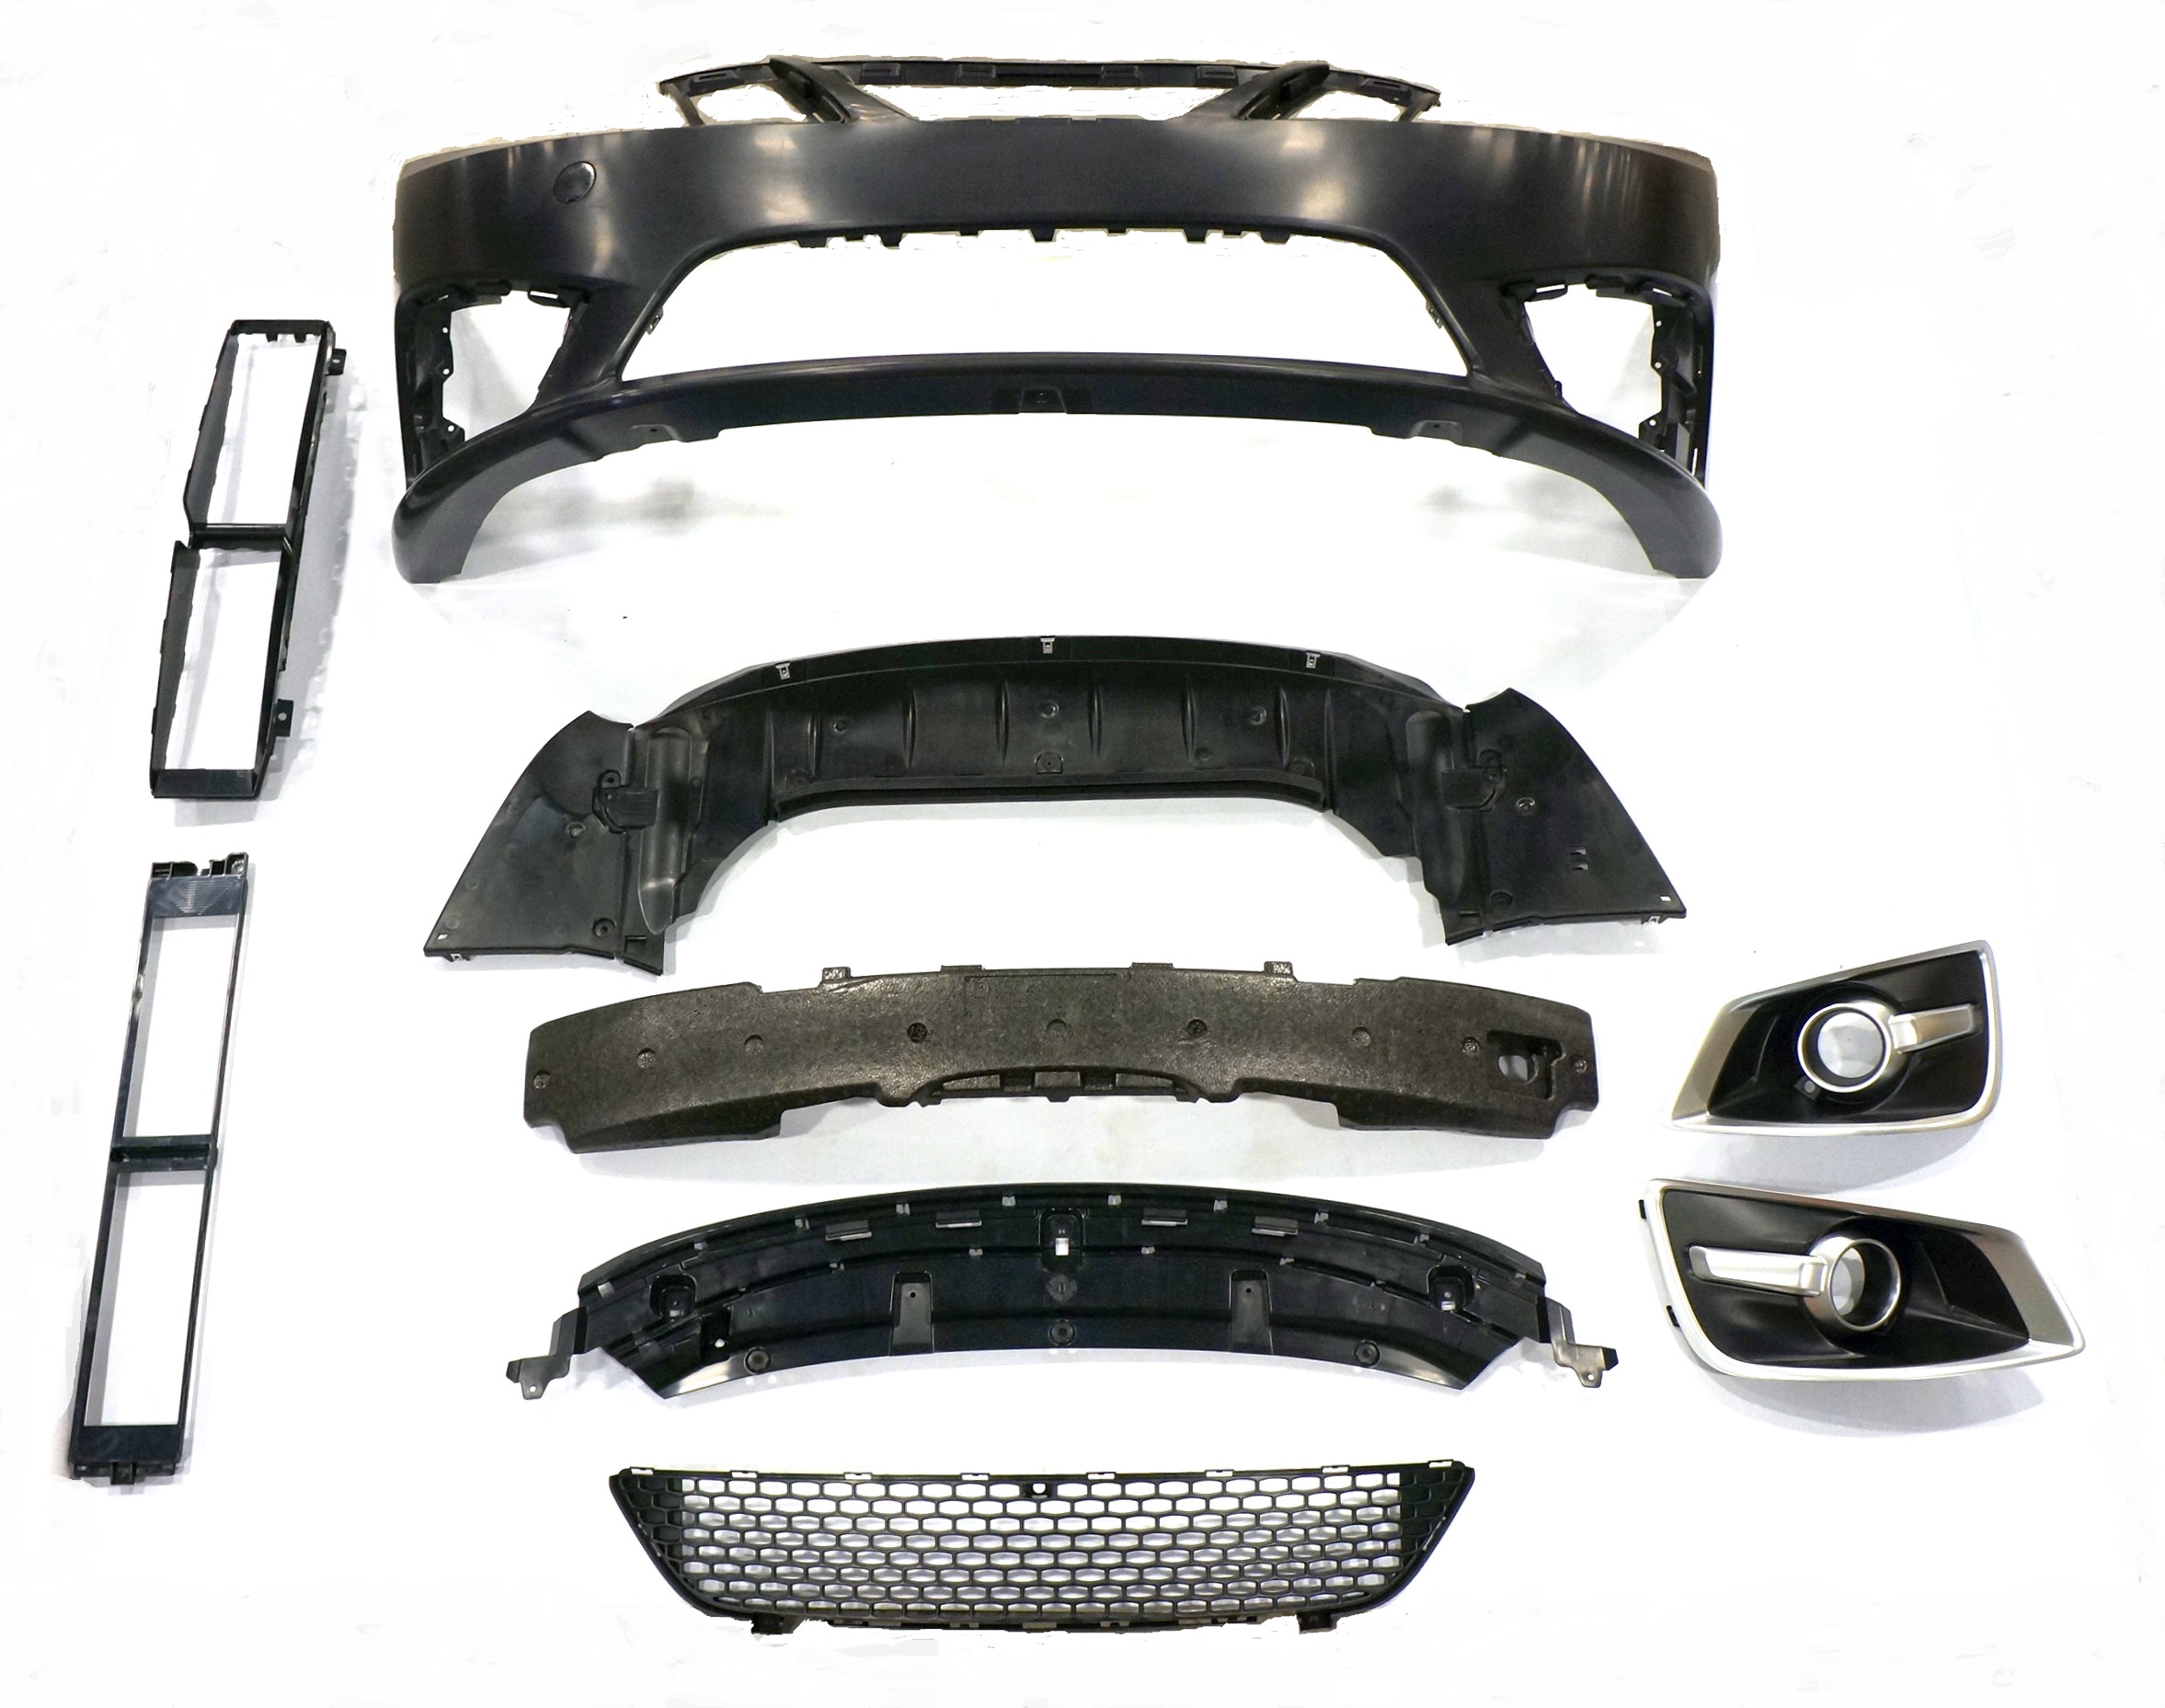 93000001 by OES | Griffin Bumper Upgrade Kit - Aero (w/ Headlamp Washers)